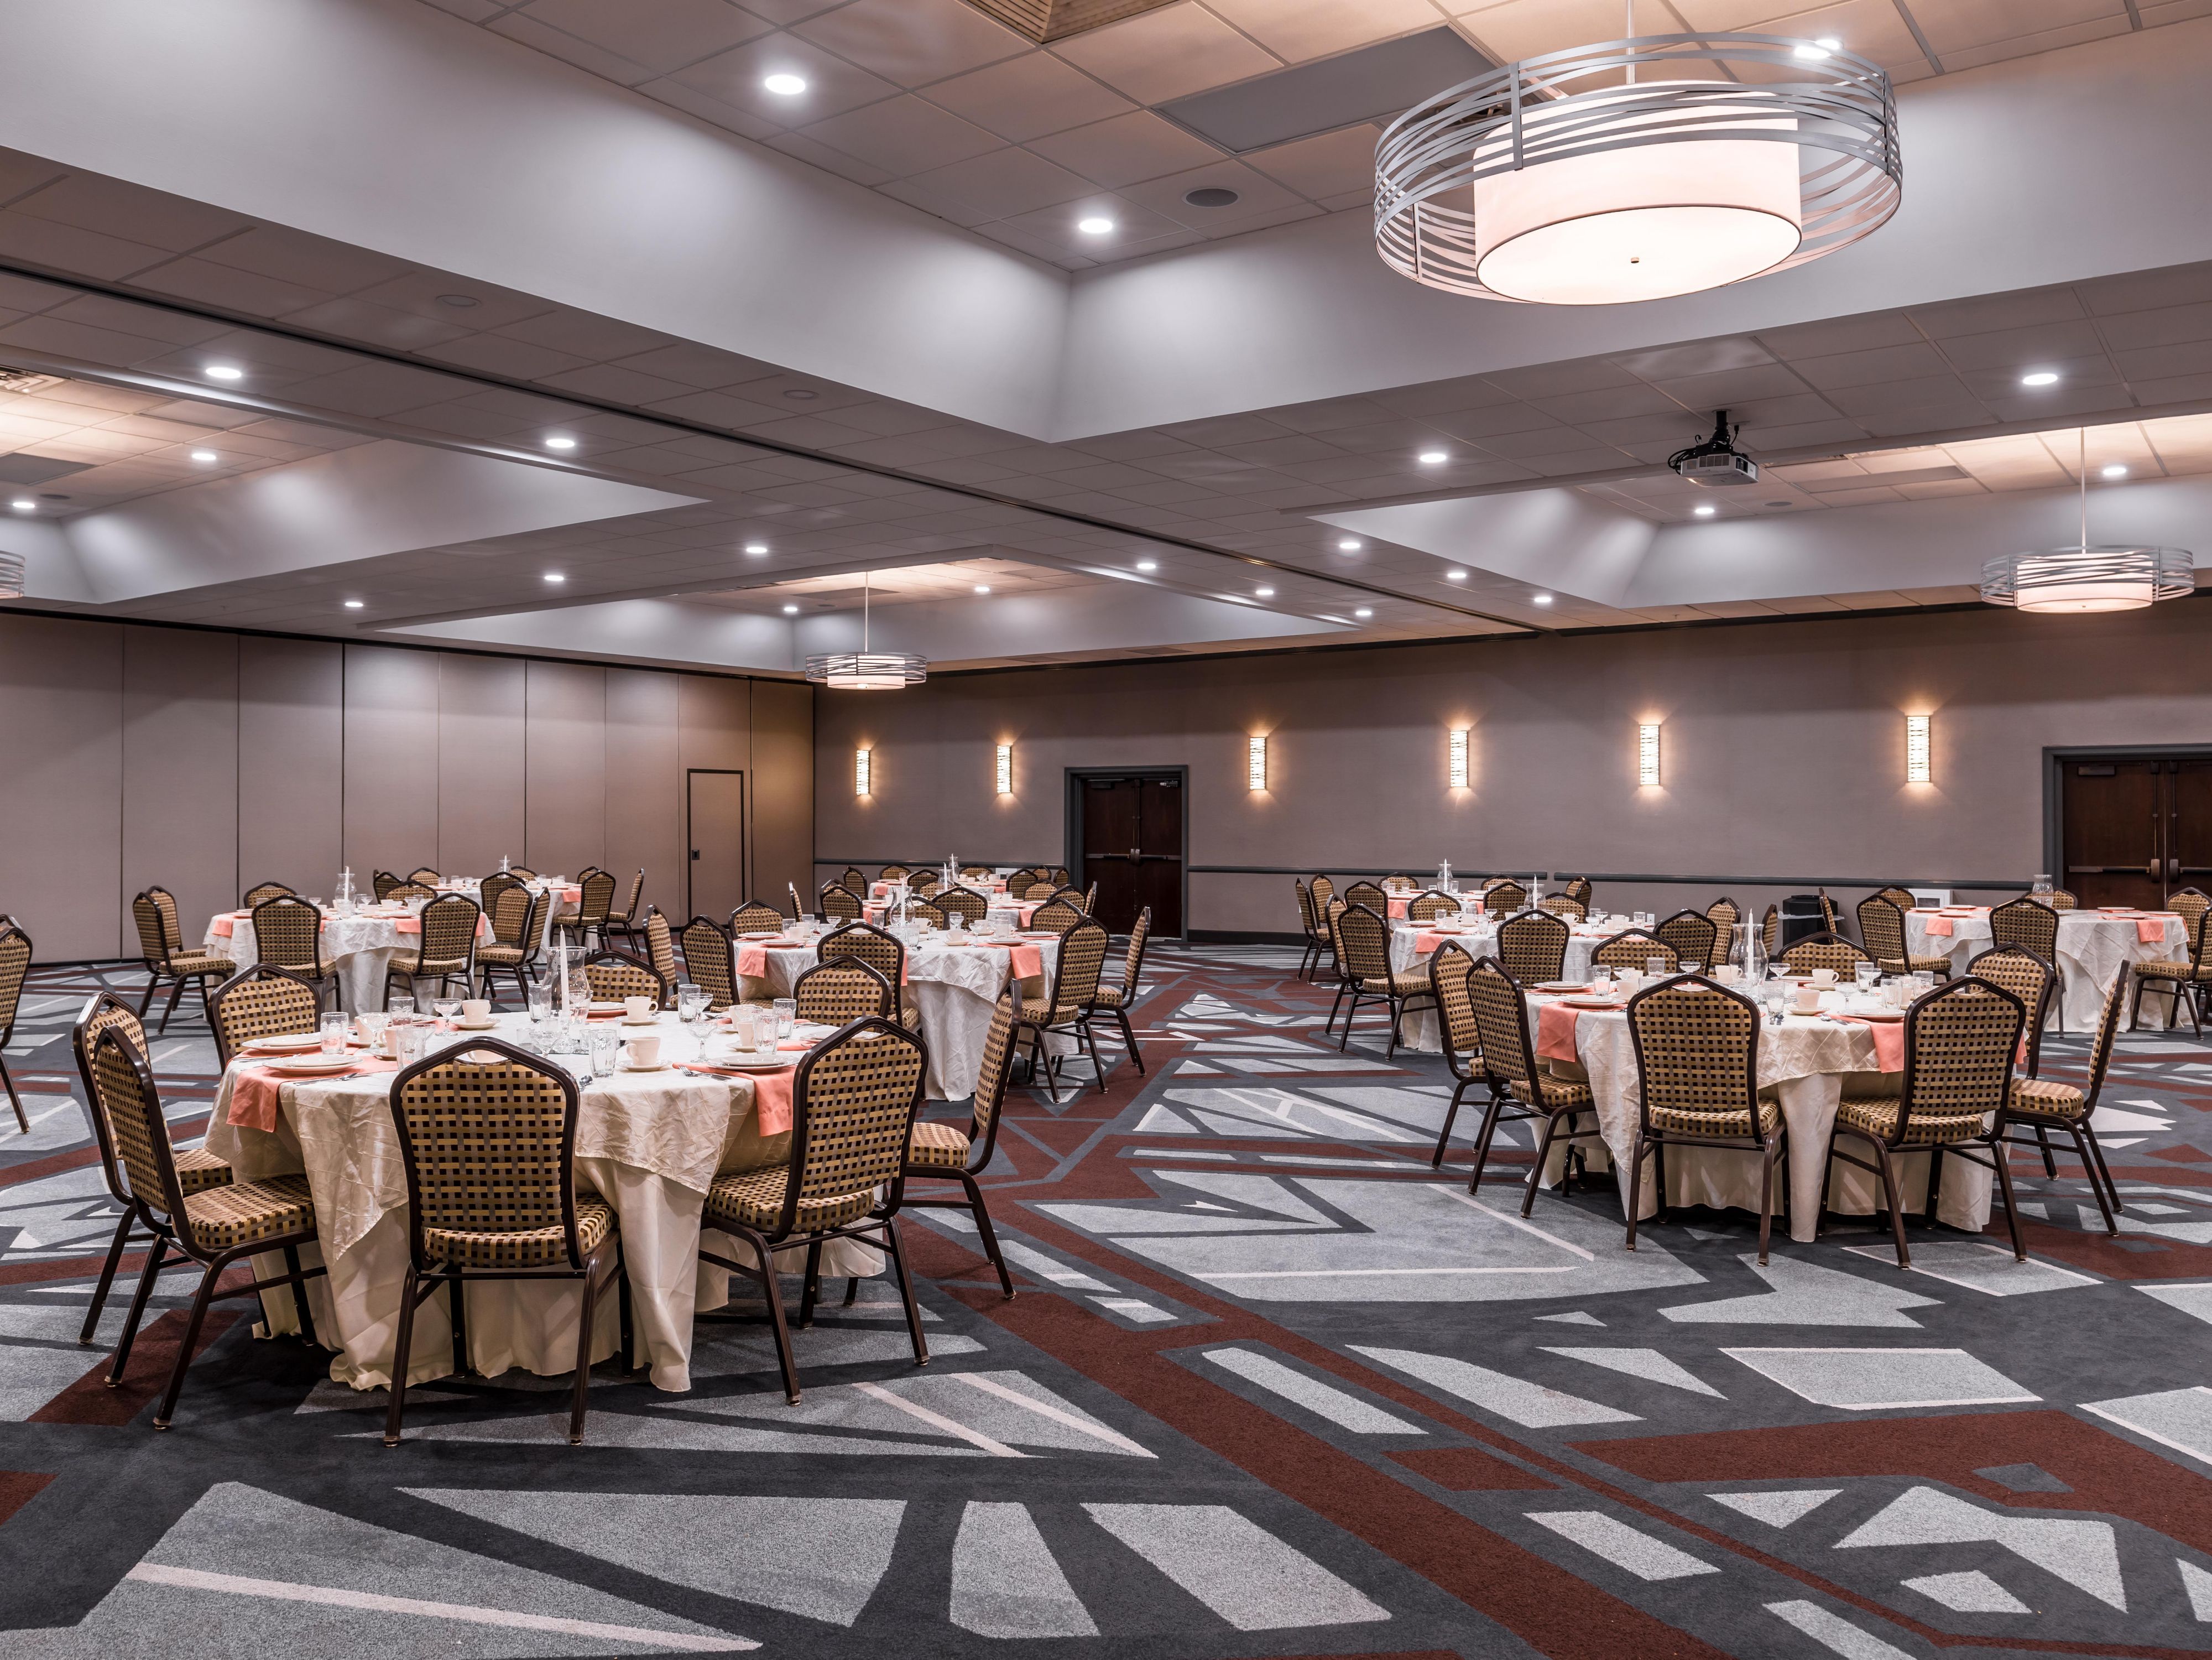 Big or small corporate meetings, intimate wedding, or a lavish event and reception, our hotel and its professional staff are trusted to ensure every detail is executed with perfection. Our beautiful newly renovated event space can accommodate up to 300 guests. We also offer discounts on wedding room blocks to host all of your family and friends.